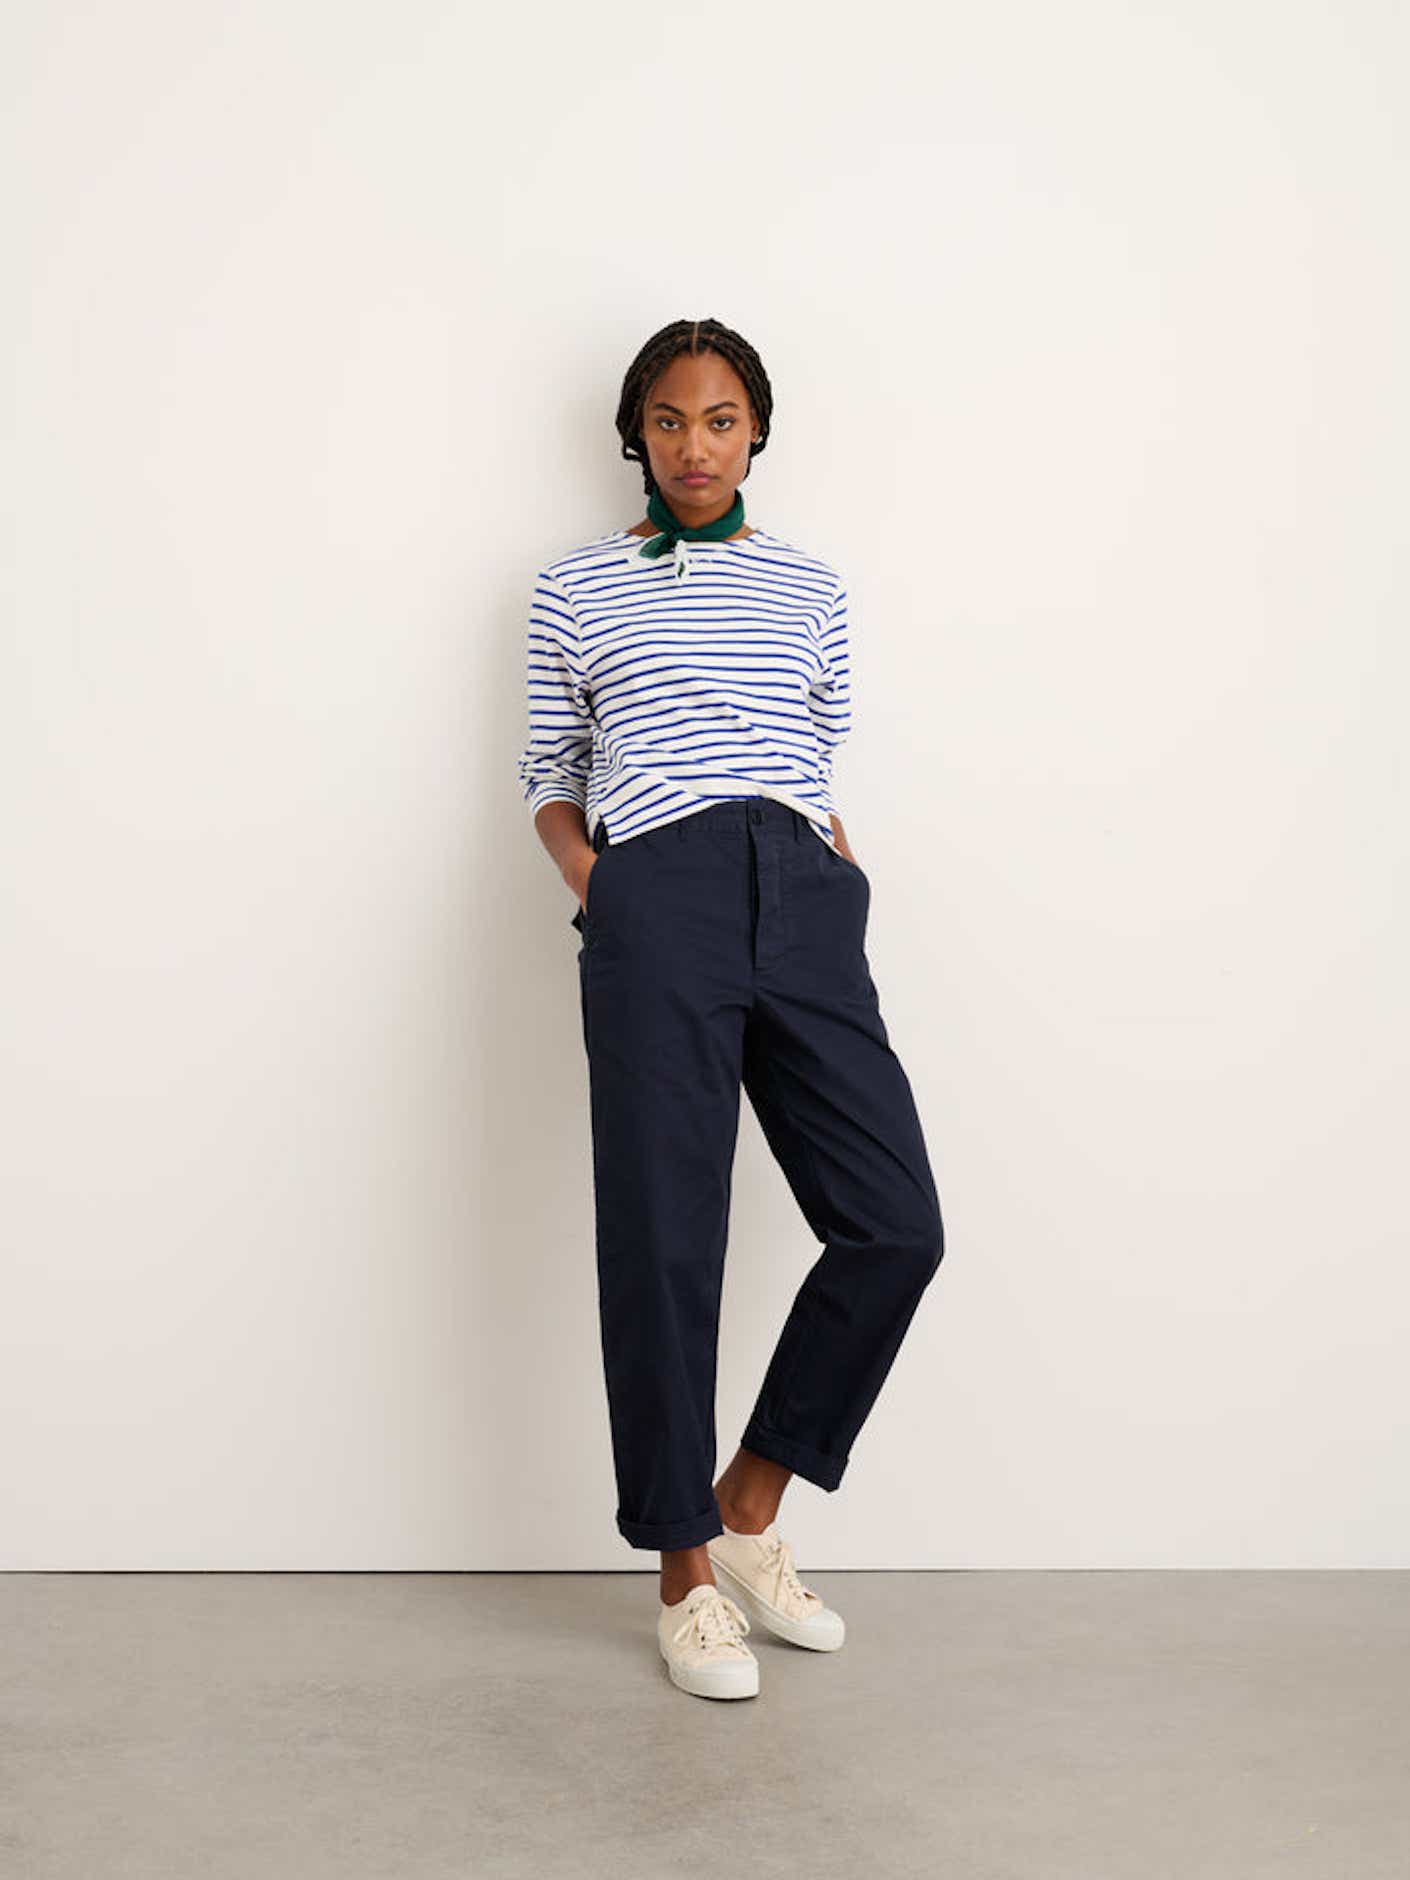 A woman wearing navy blue chinos leans against a white wall.